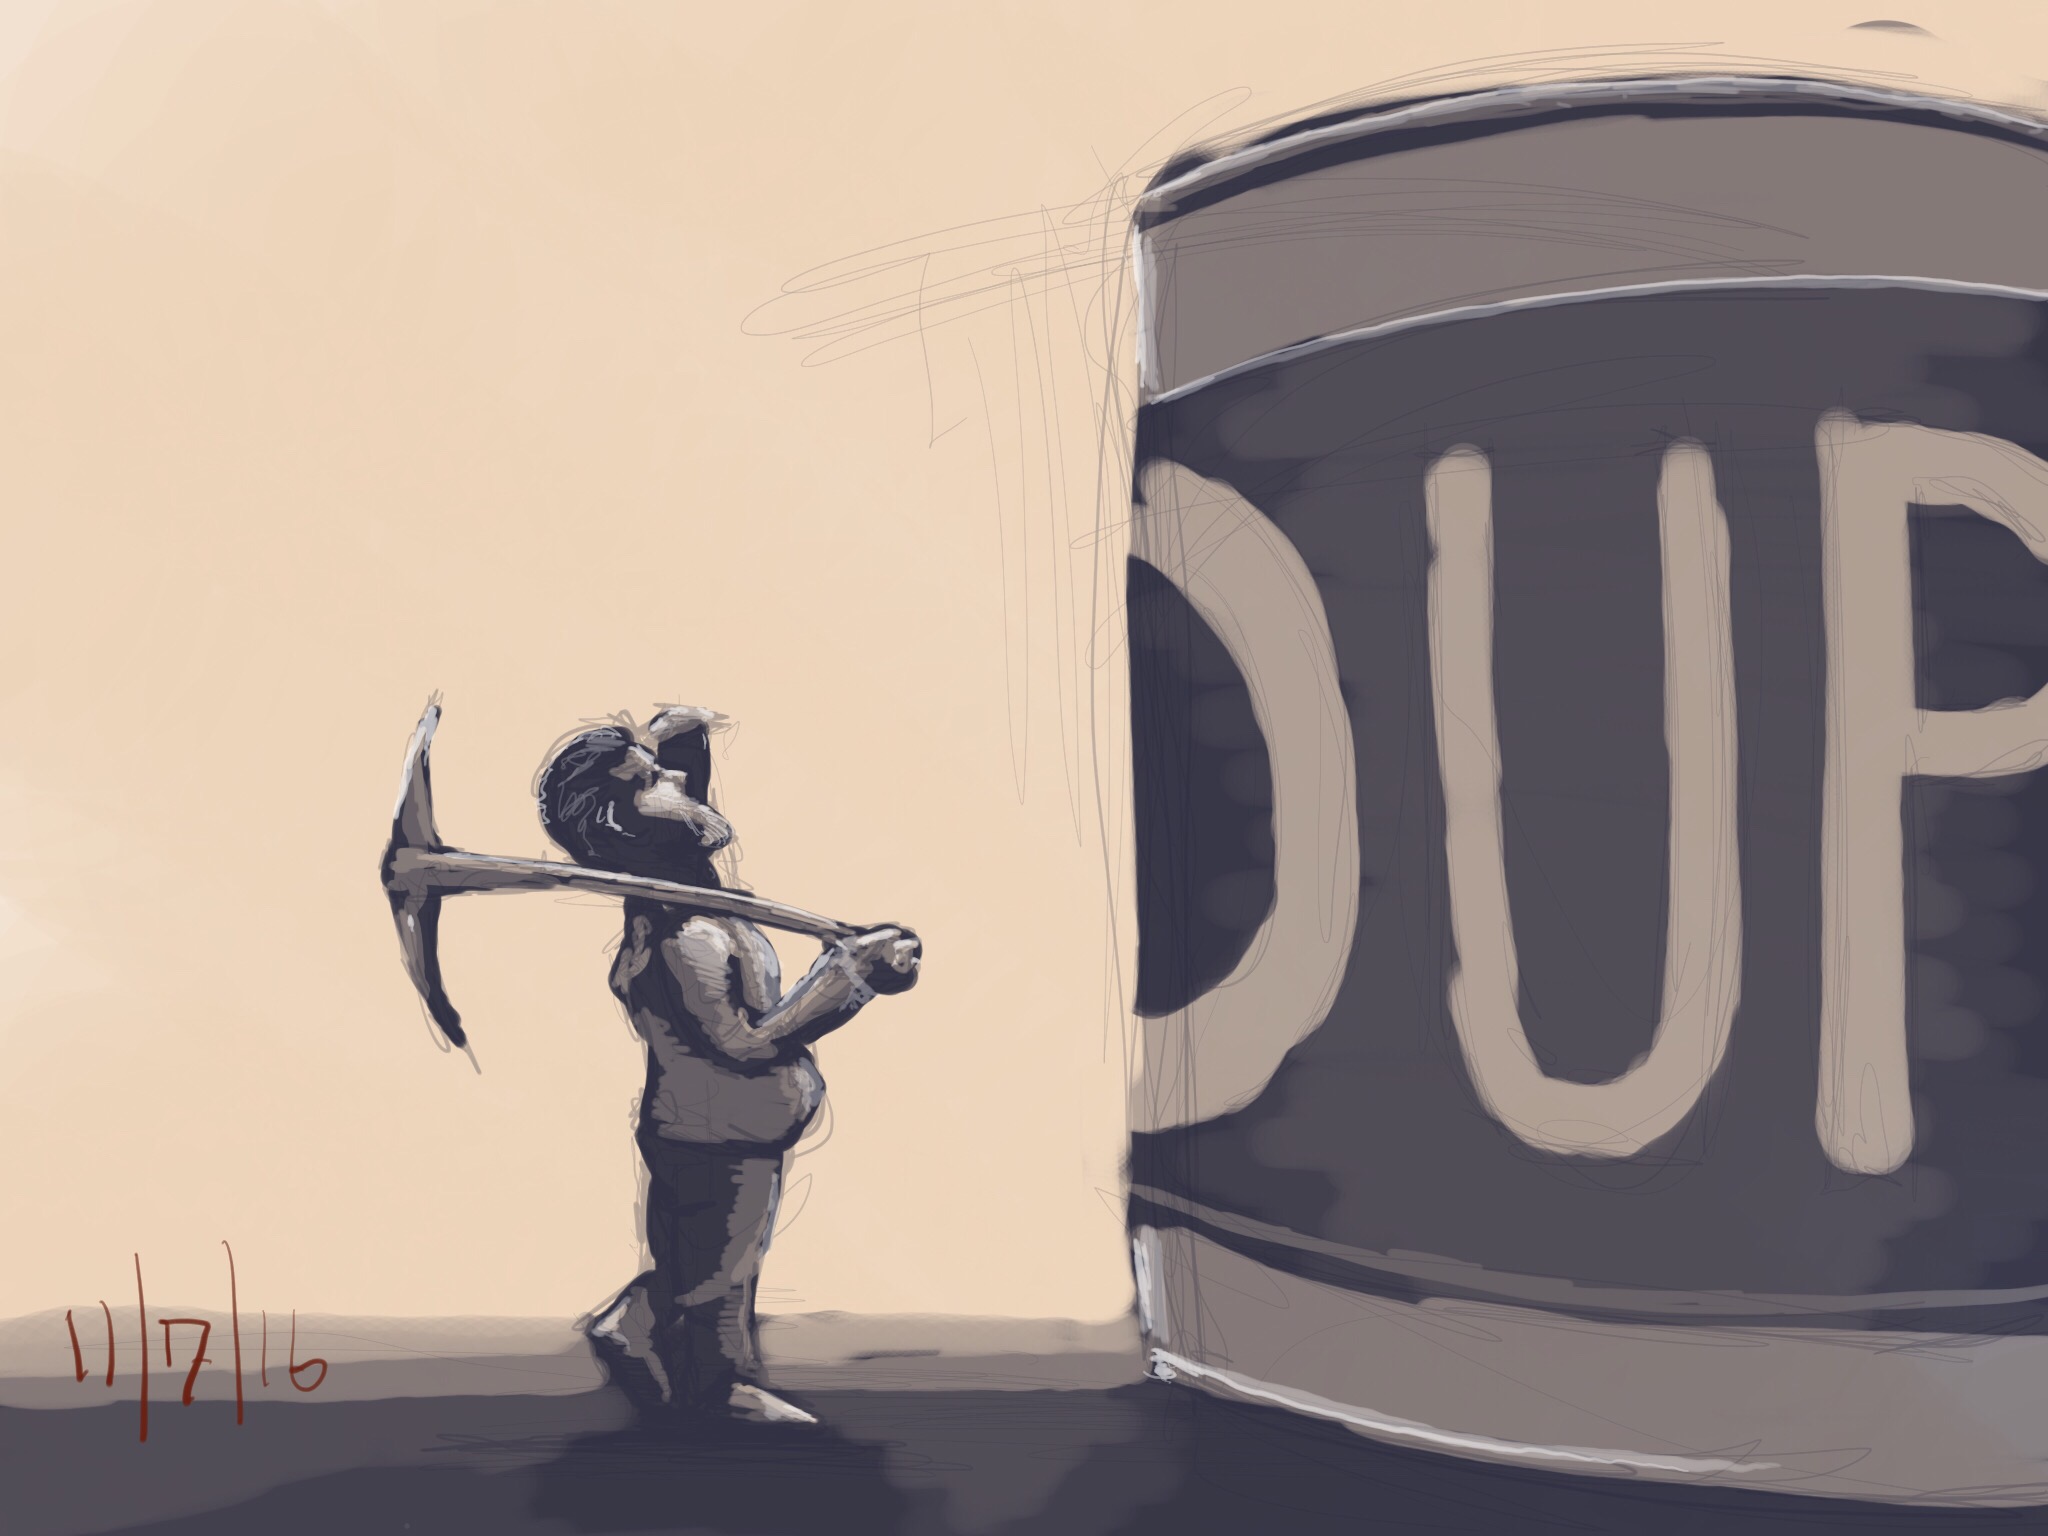 #gdpipeline daily challenge 11-7-16 "can opener"